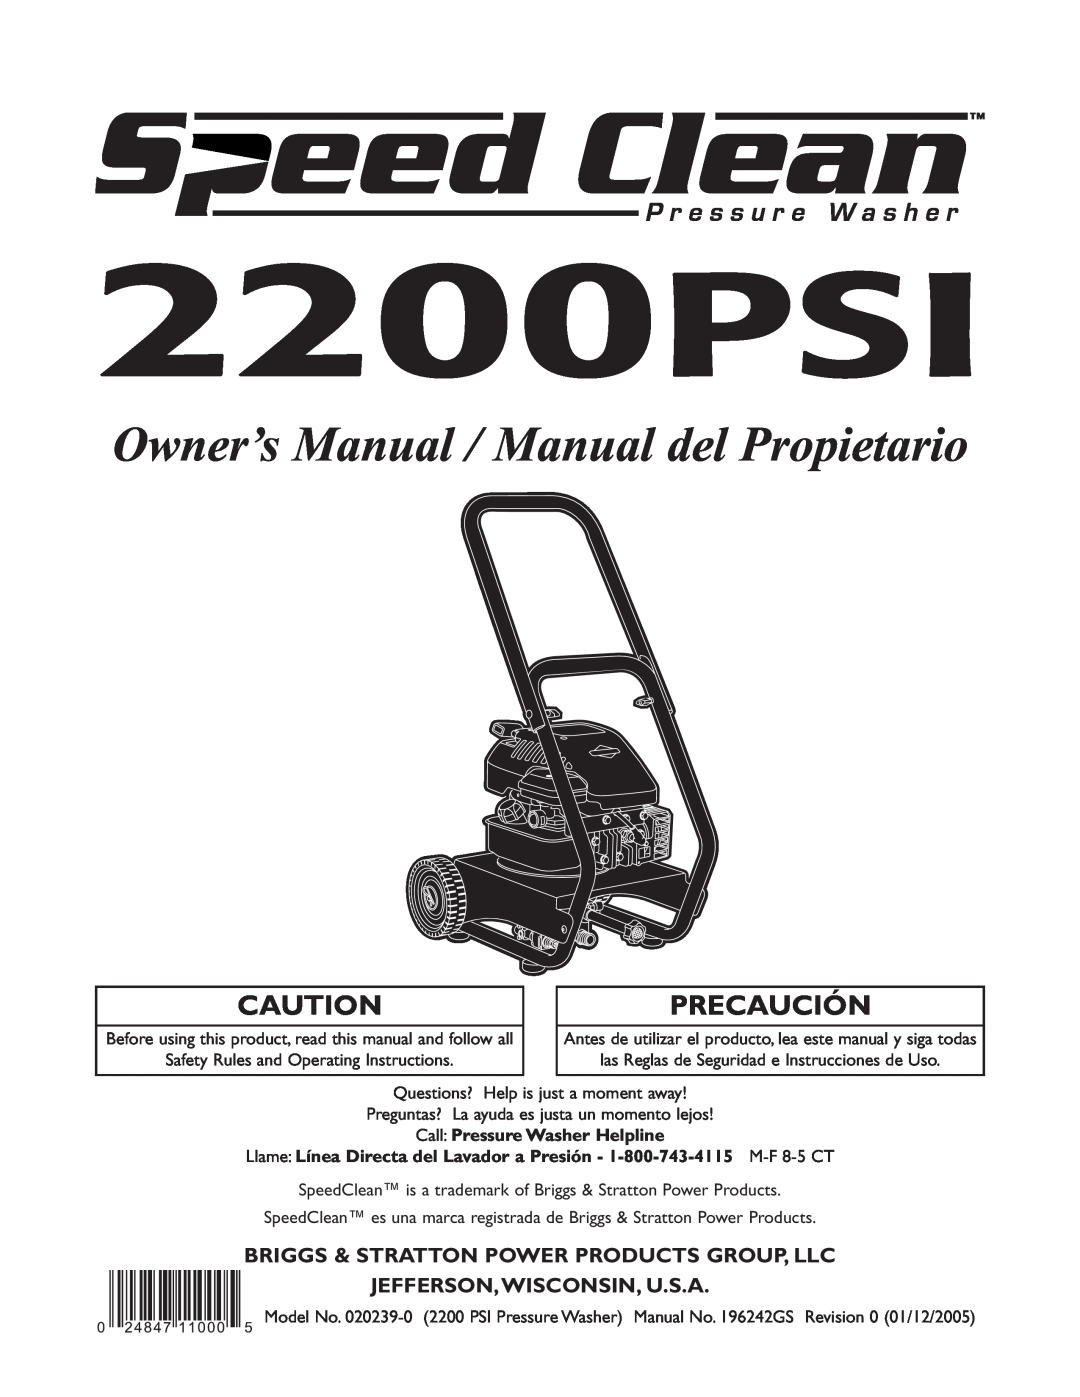 Briggs & Stratton 020239-0 owner manual Briggs & Stratton Power Products Group, Llc, Jefferson,Wisconsin, U.S.A, 2200PSI 